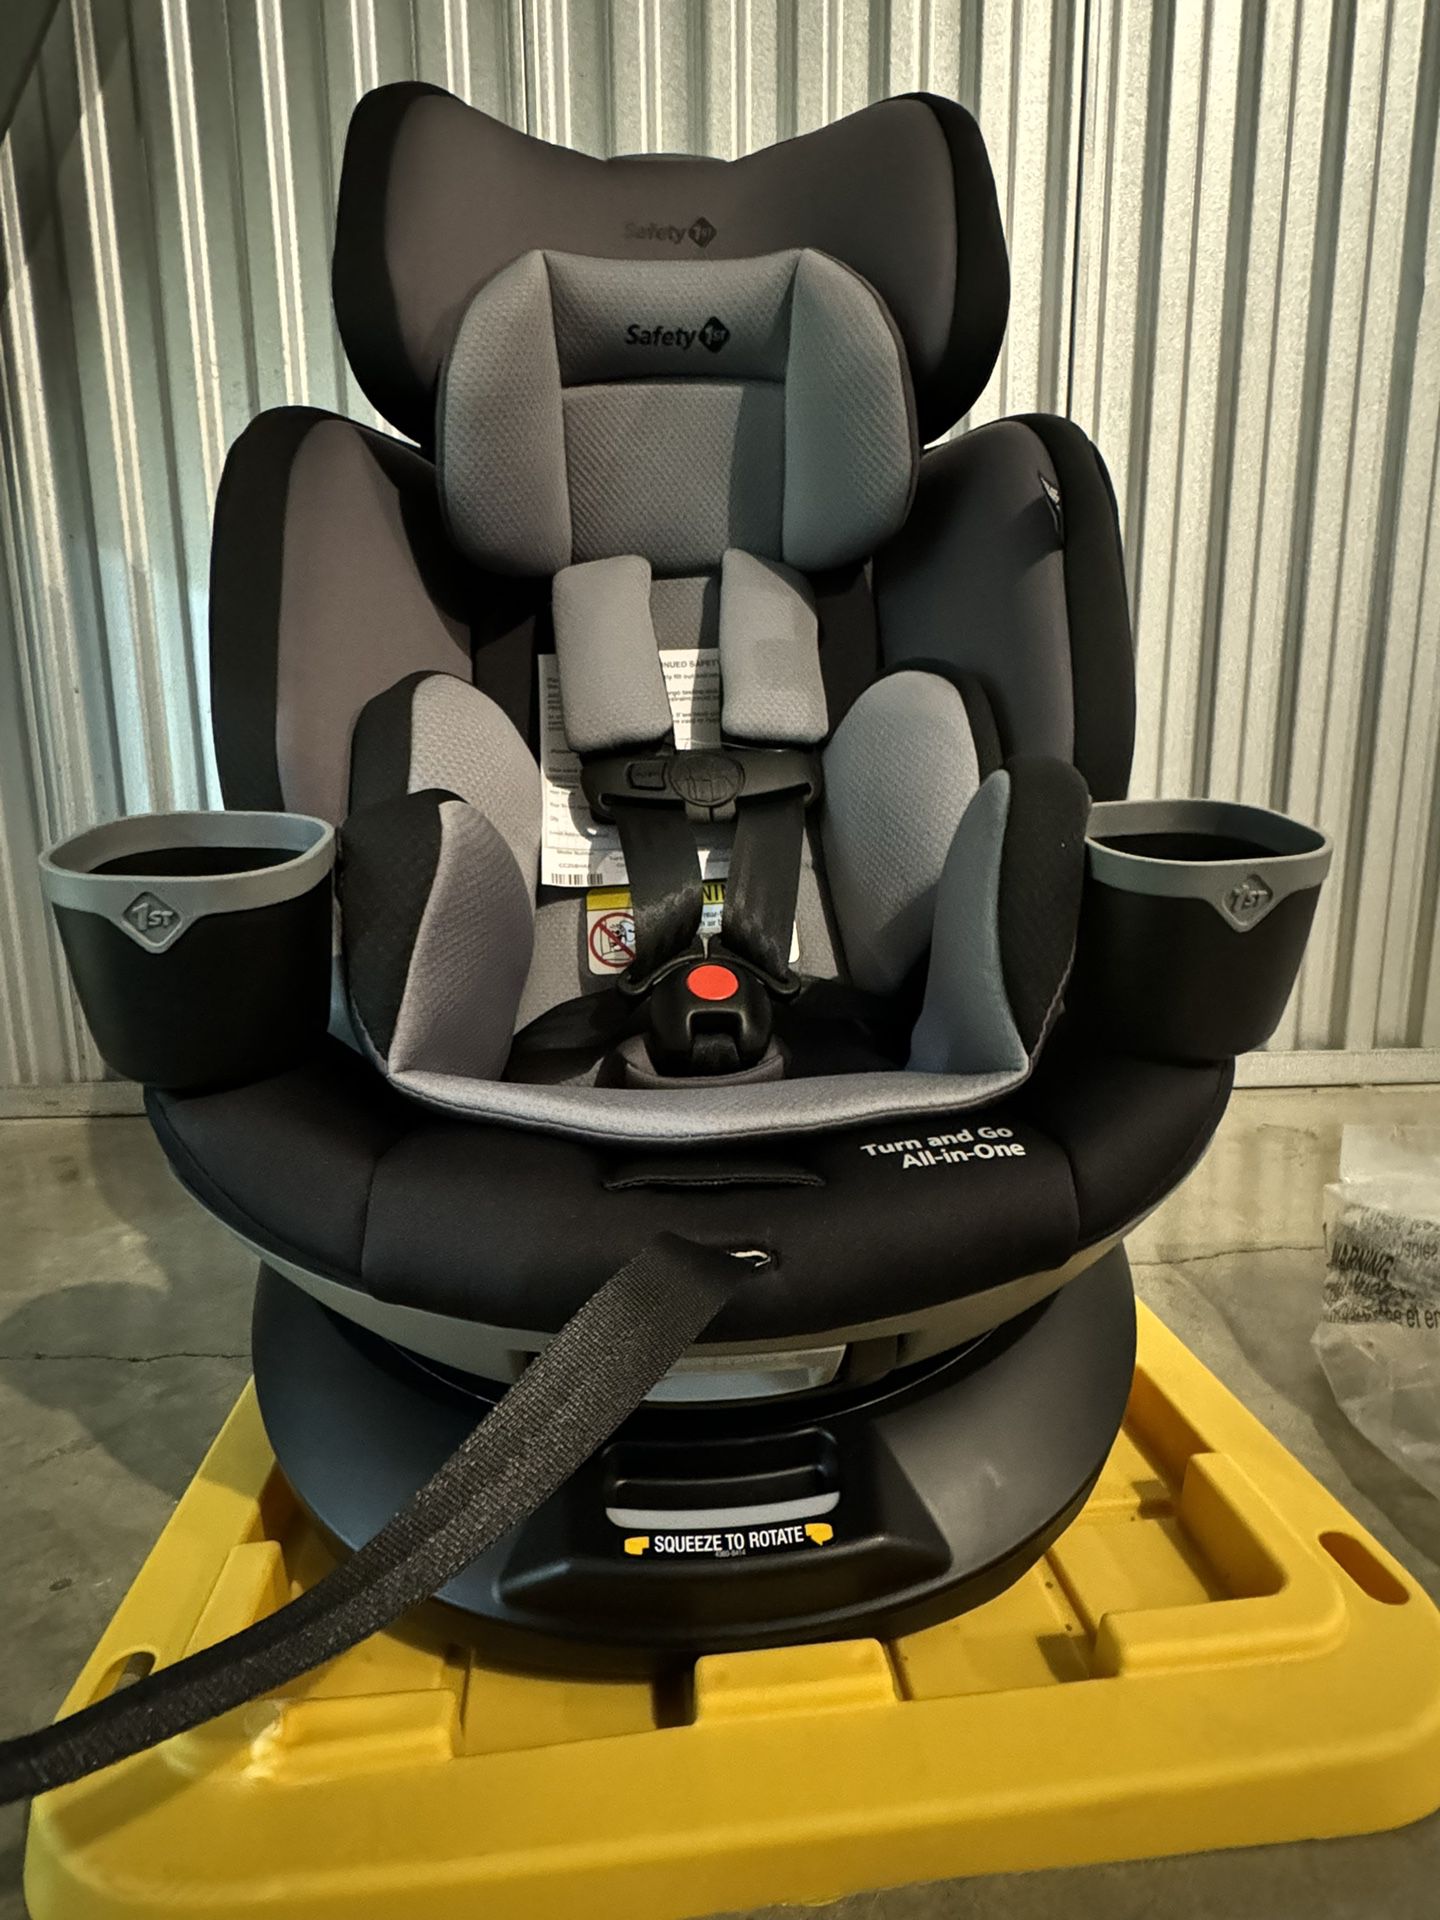 Safety 1st Turn and Go 360 Rotating All-in-One Convertible Car Seat